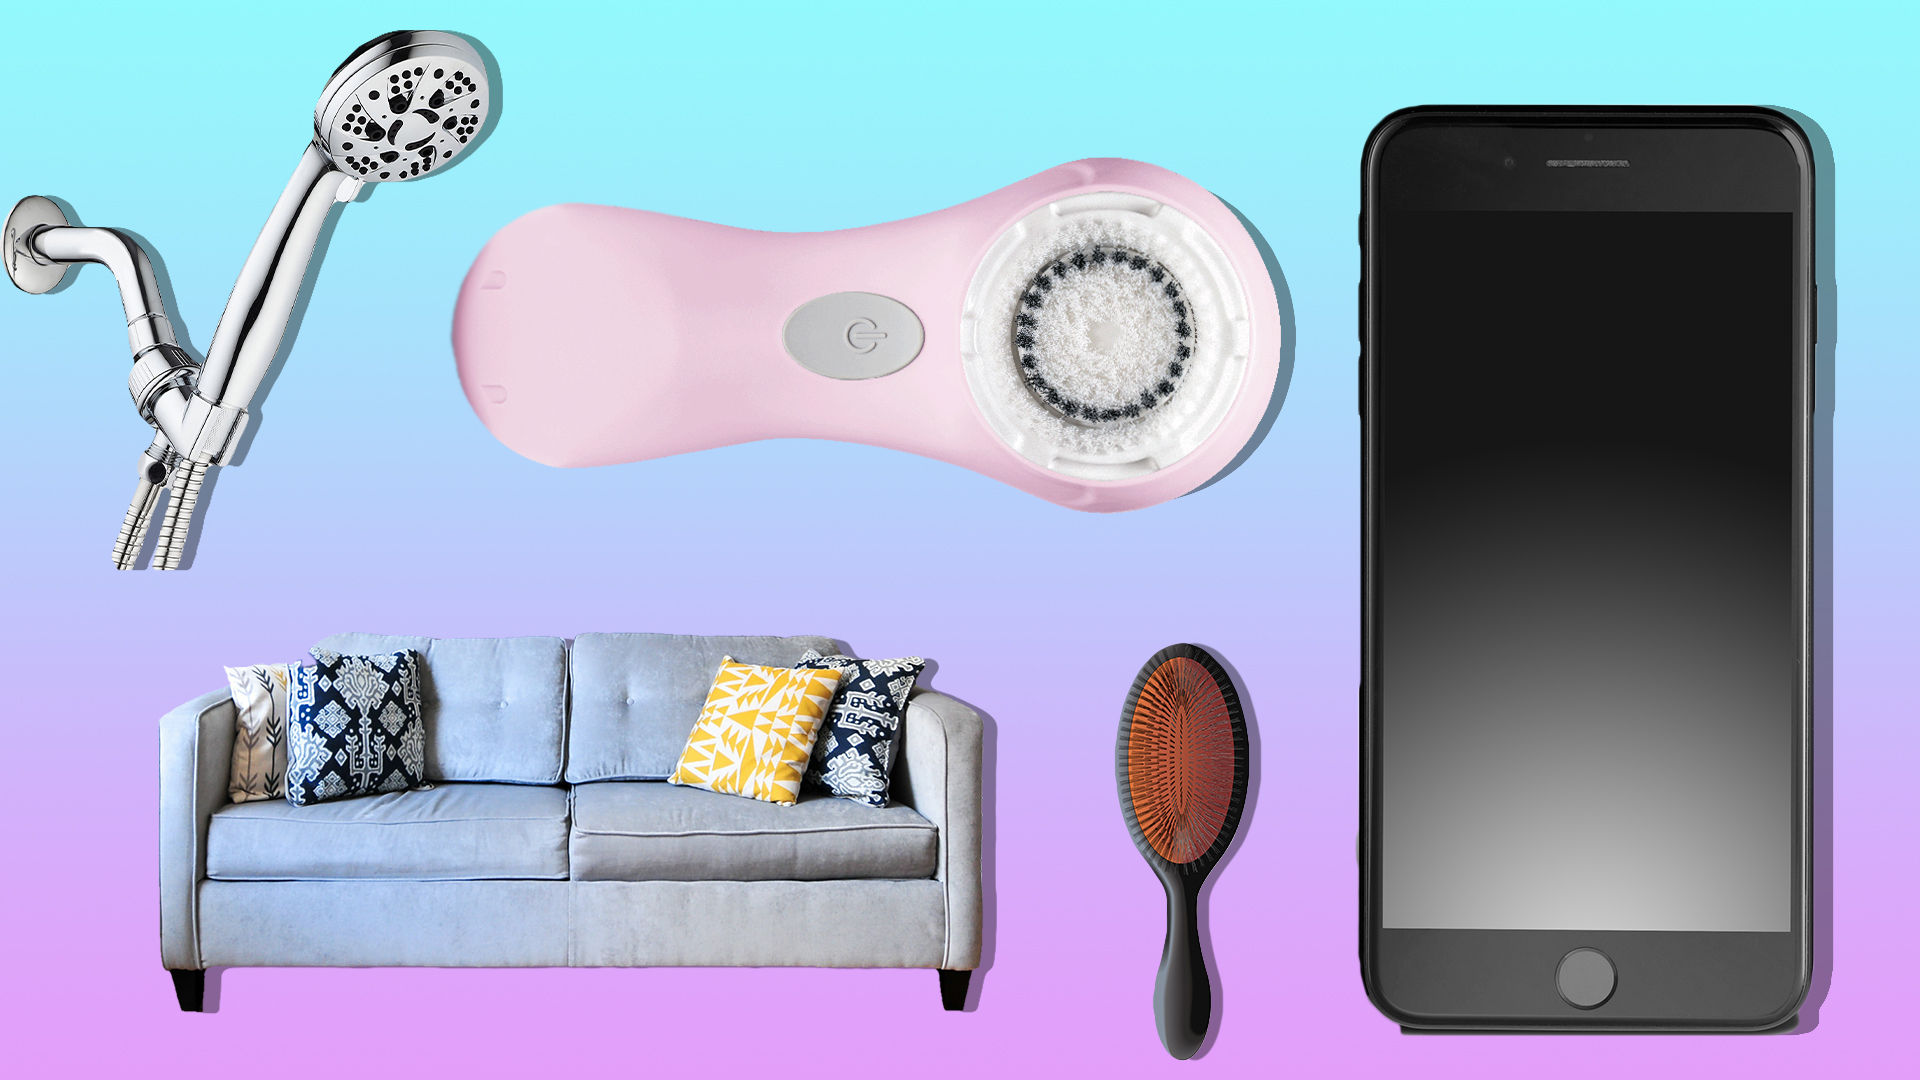 Home objects to heighten orgasm